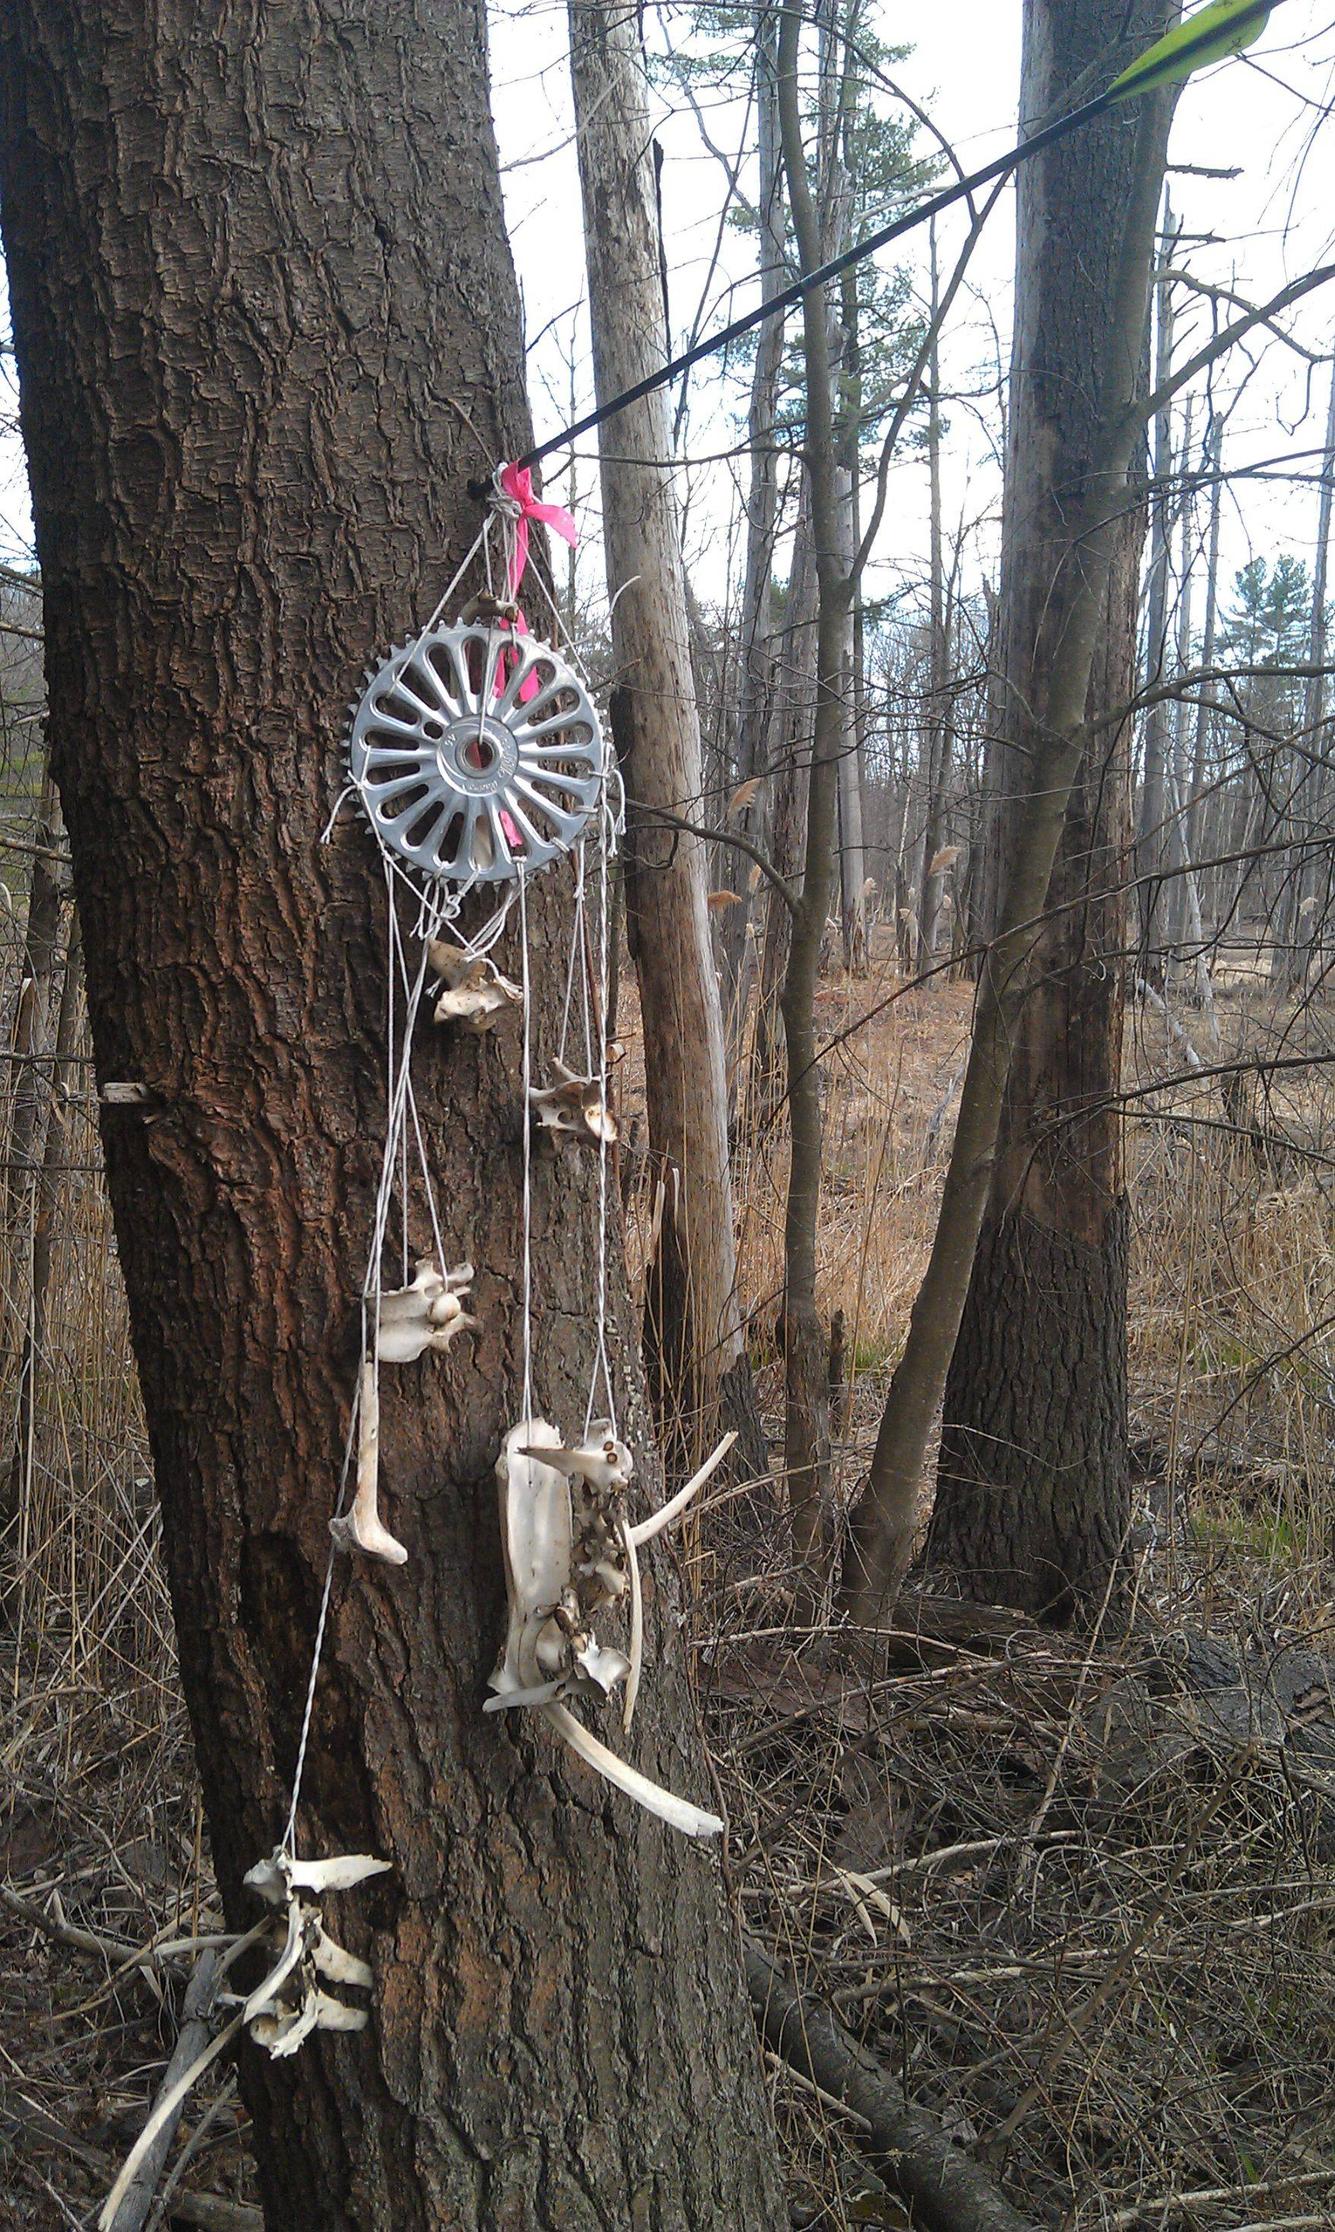 Someone stumbled upon this in the woods.... NOPE.